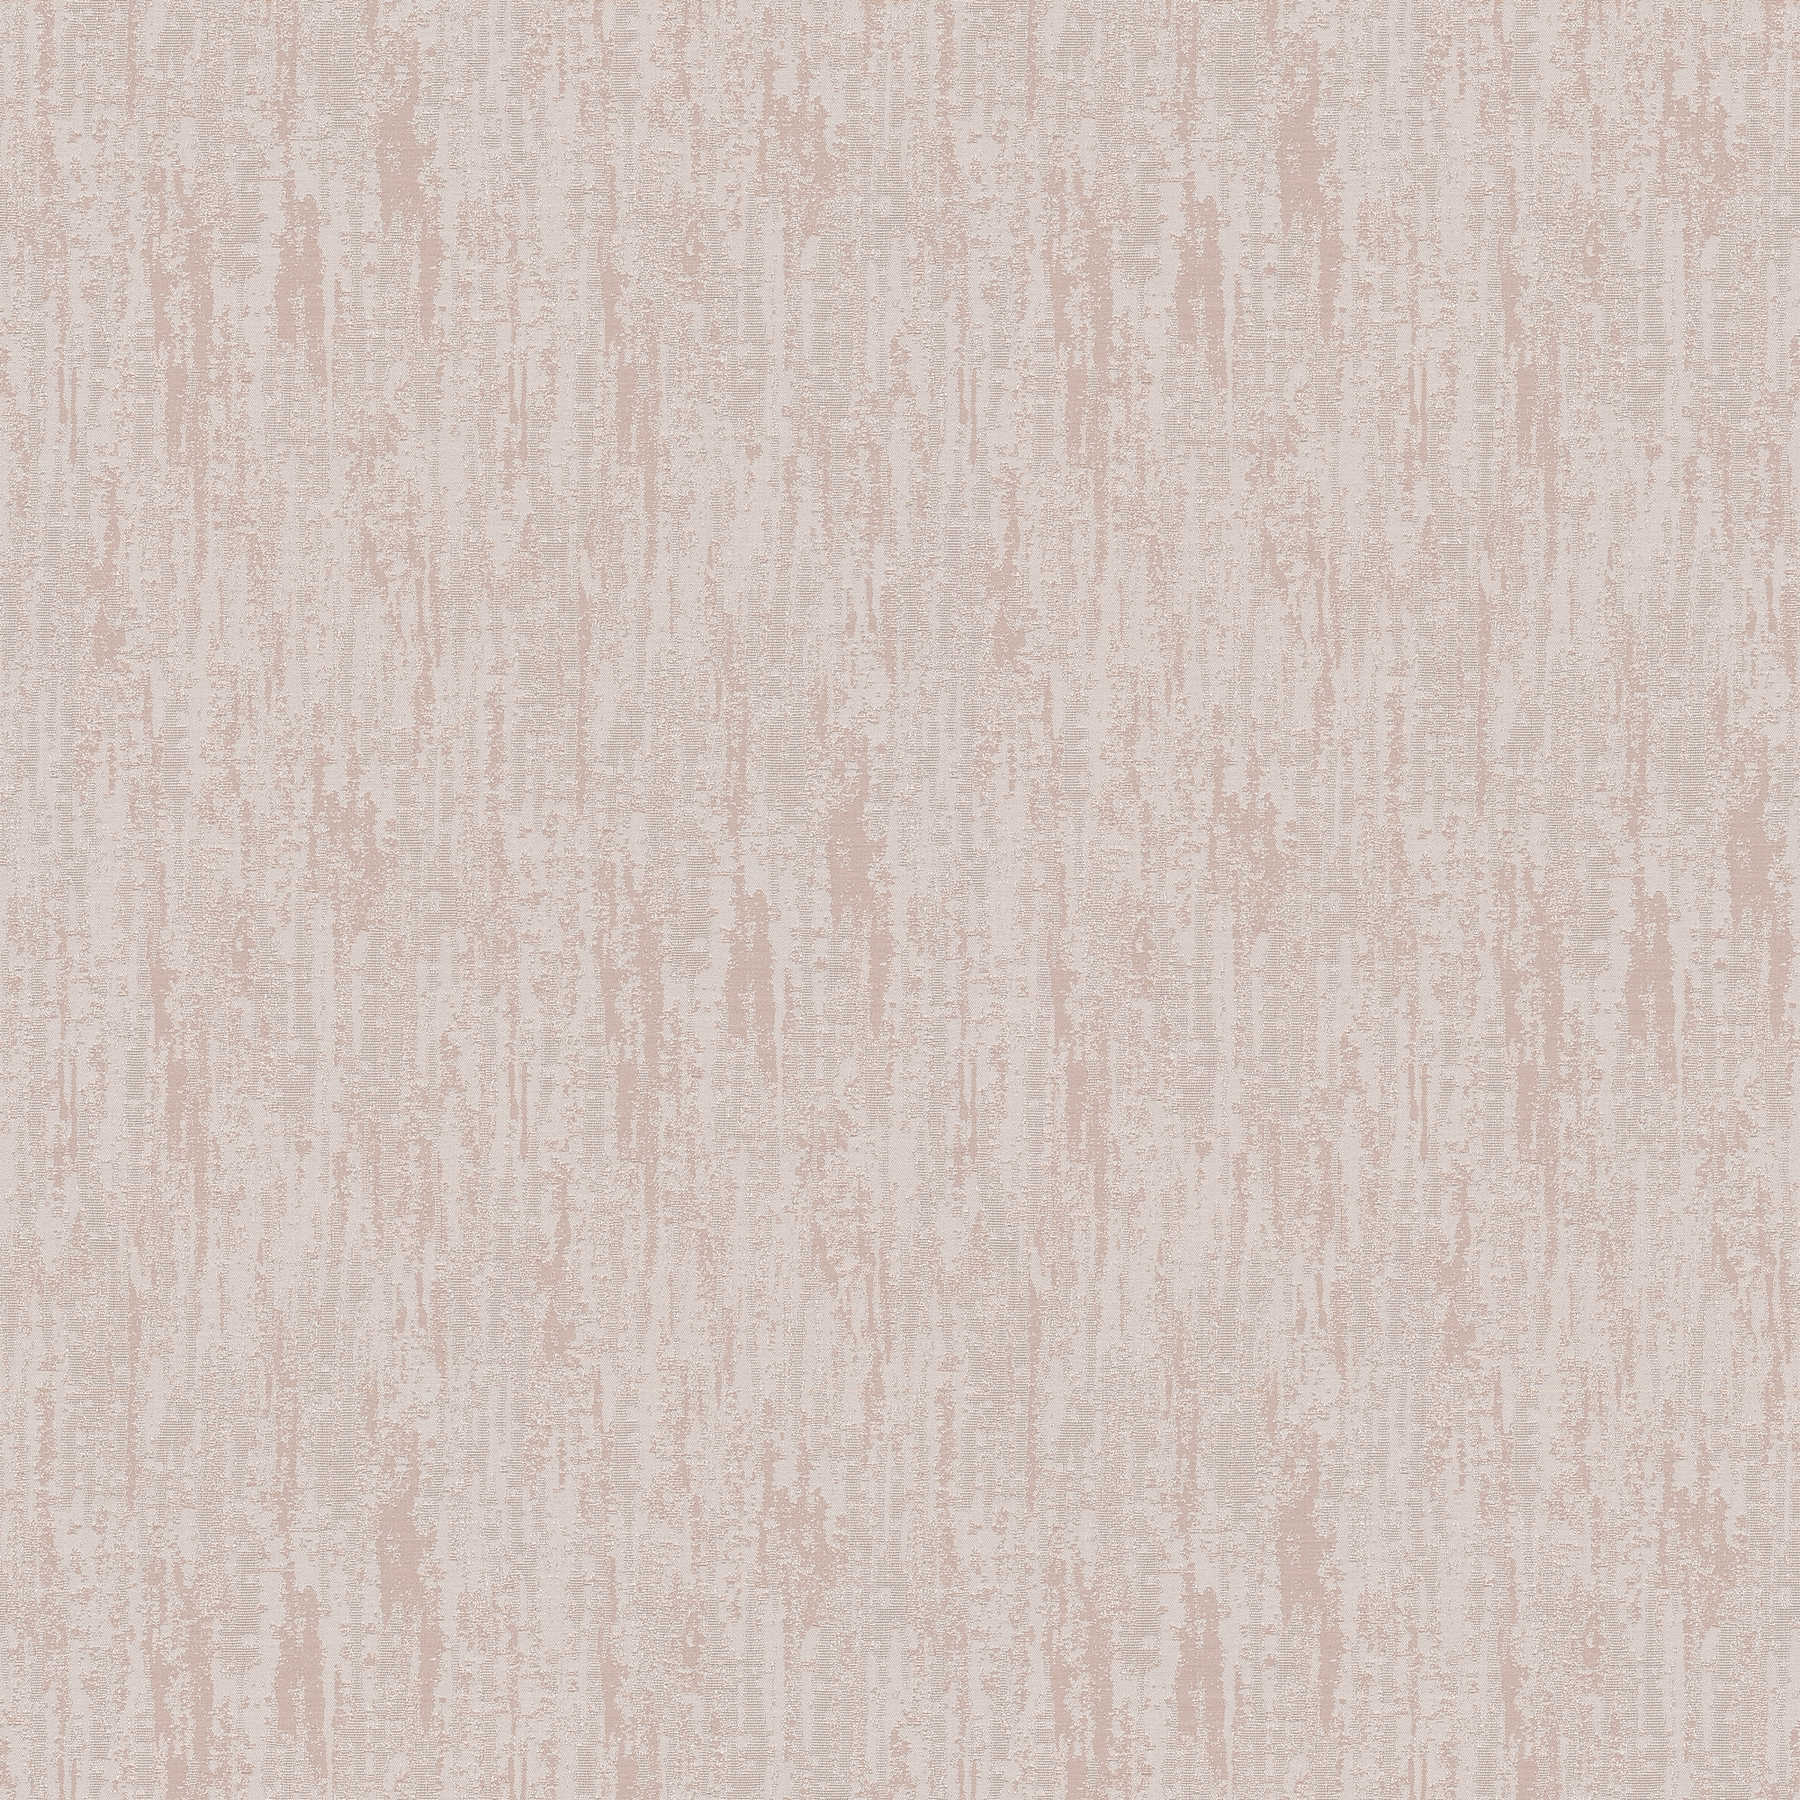 Melange wallpaper with colour hatching & textured pattern - pink
